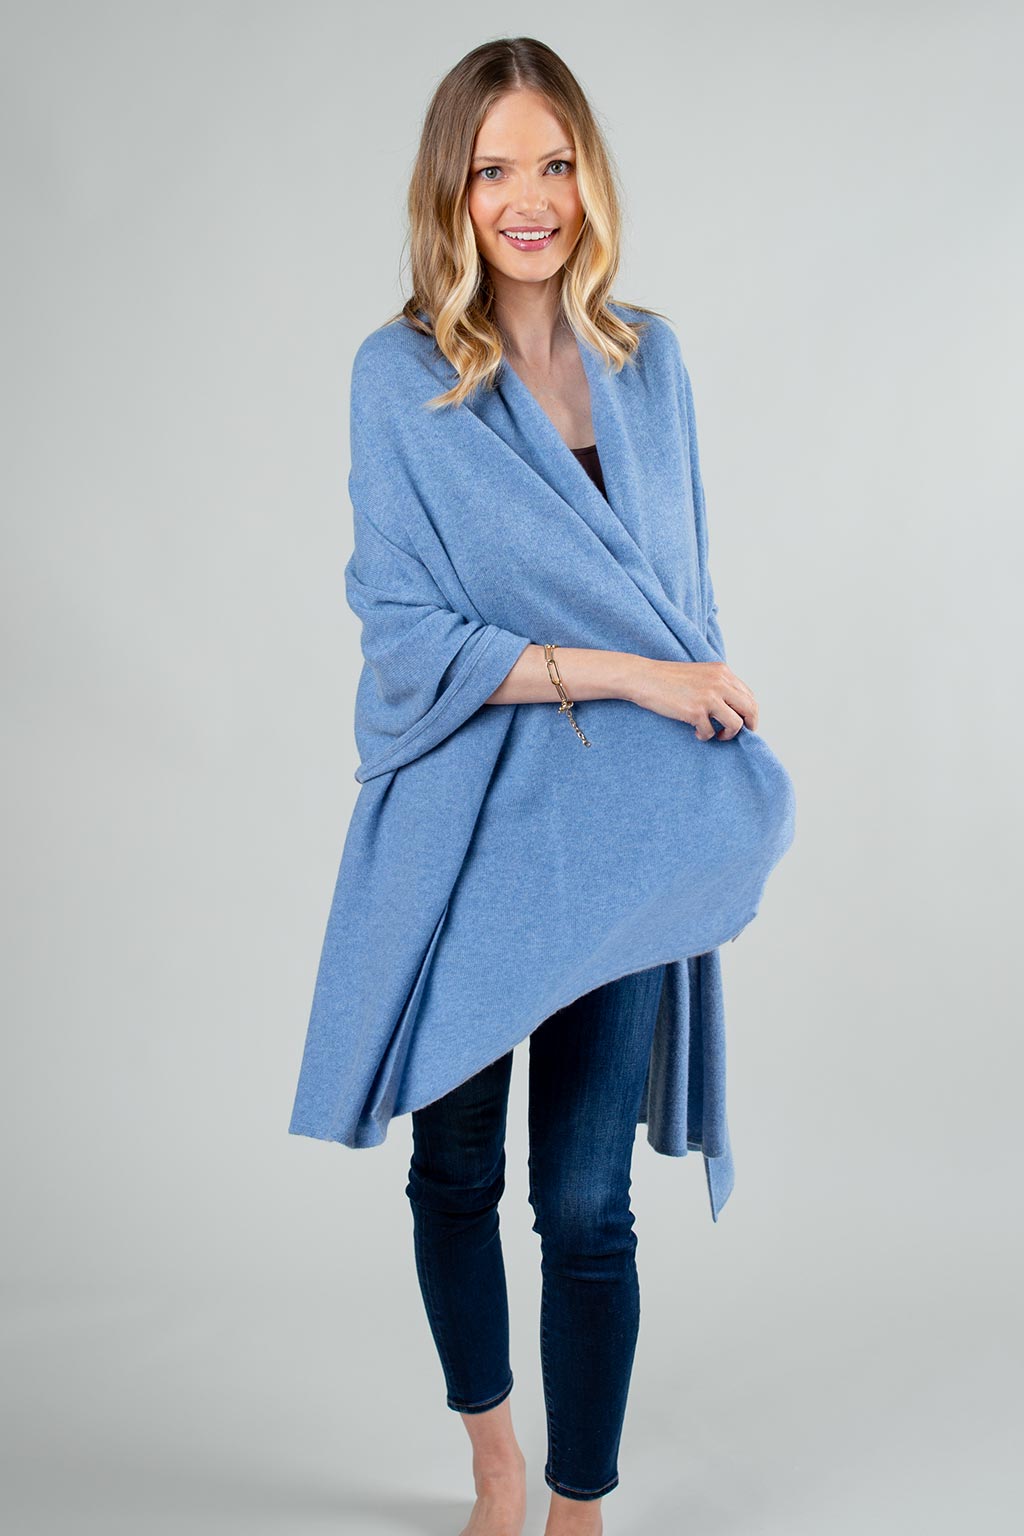 Model Wearing Alpine Cashmere's Luxurious Chunky Travel Wrap in Blue Mist